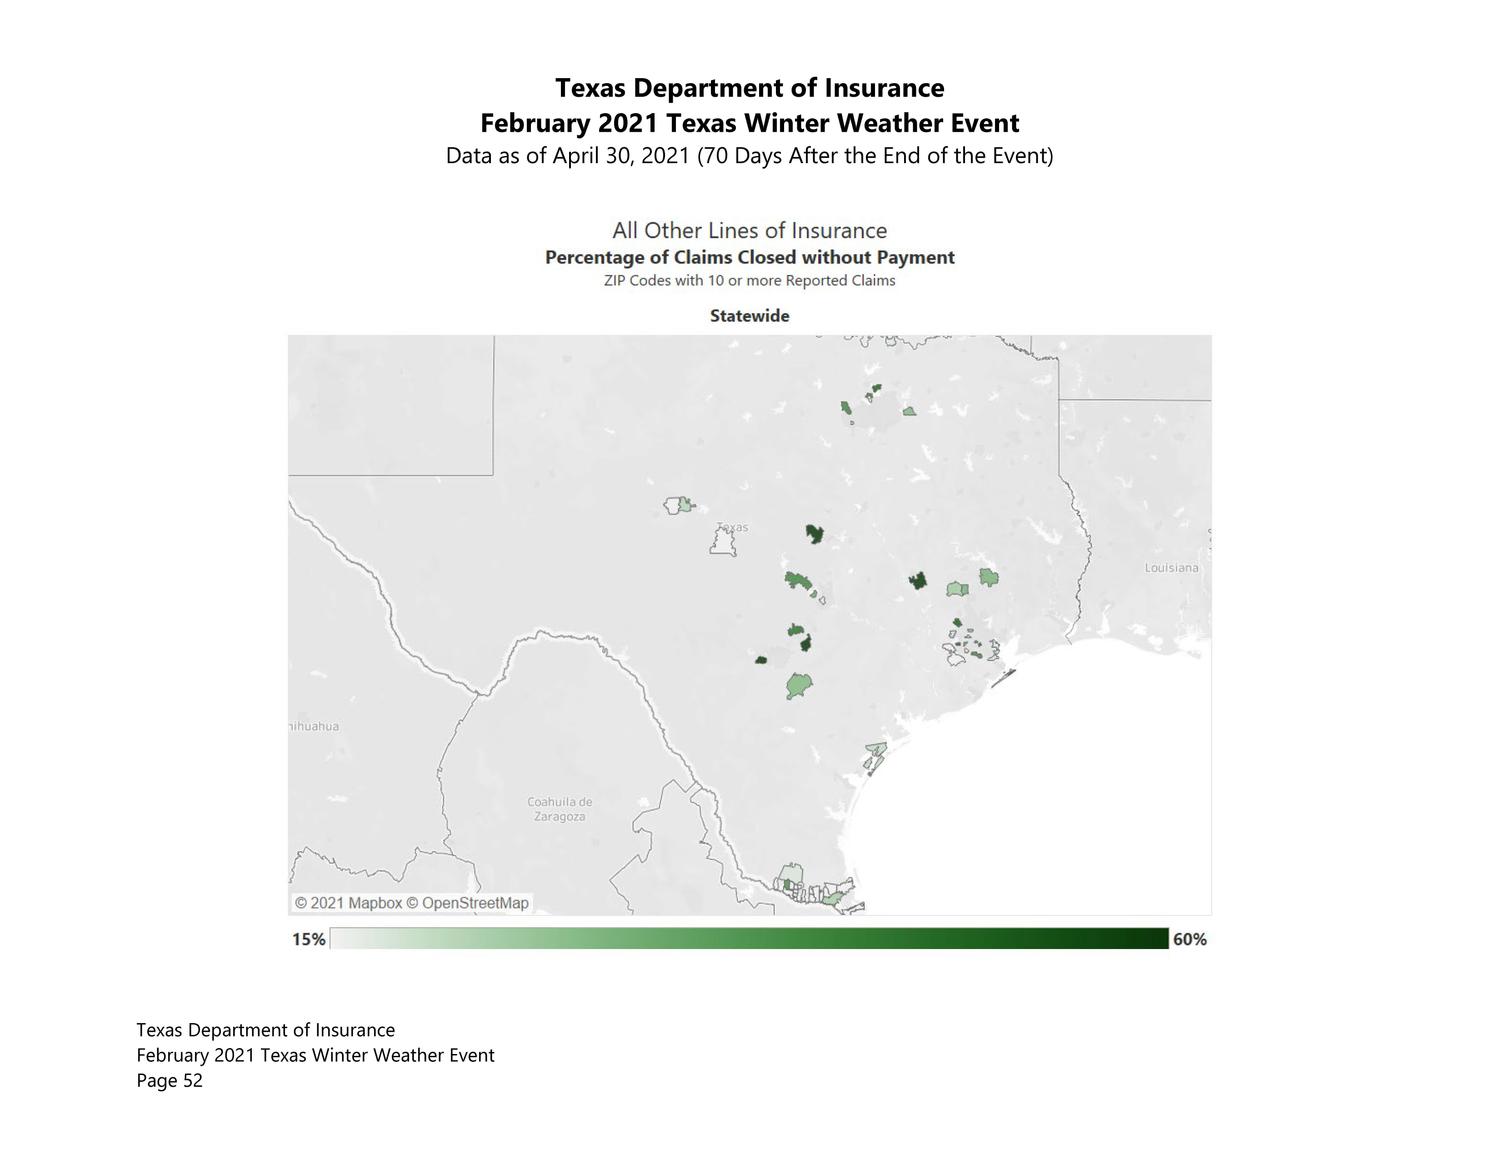 Insured Losses Resulting from the February 2021 Texas Winter Weather Event: April 2021
                                                
                                                    52
                                                